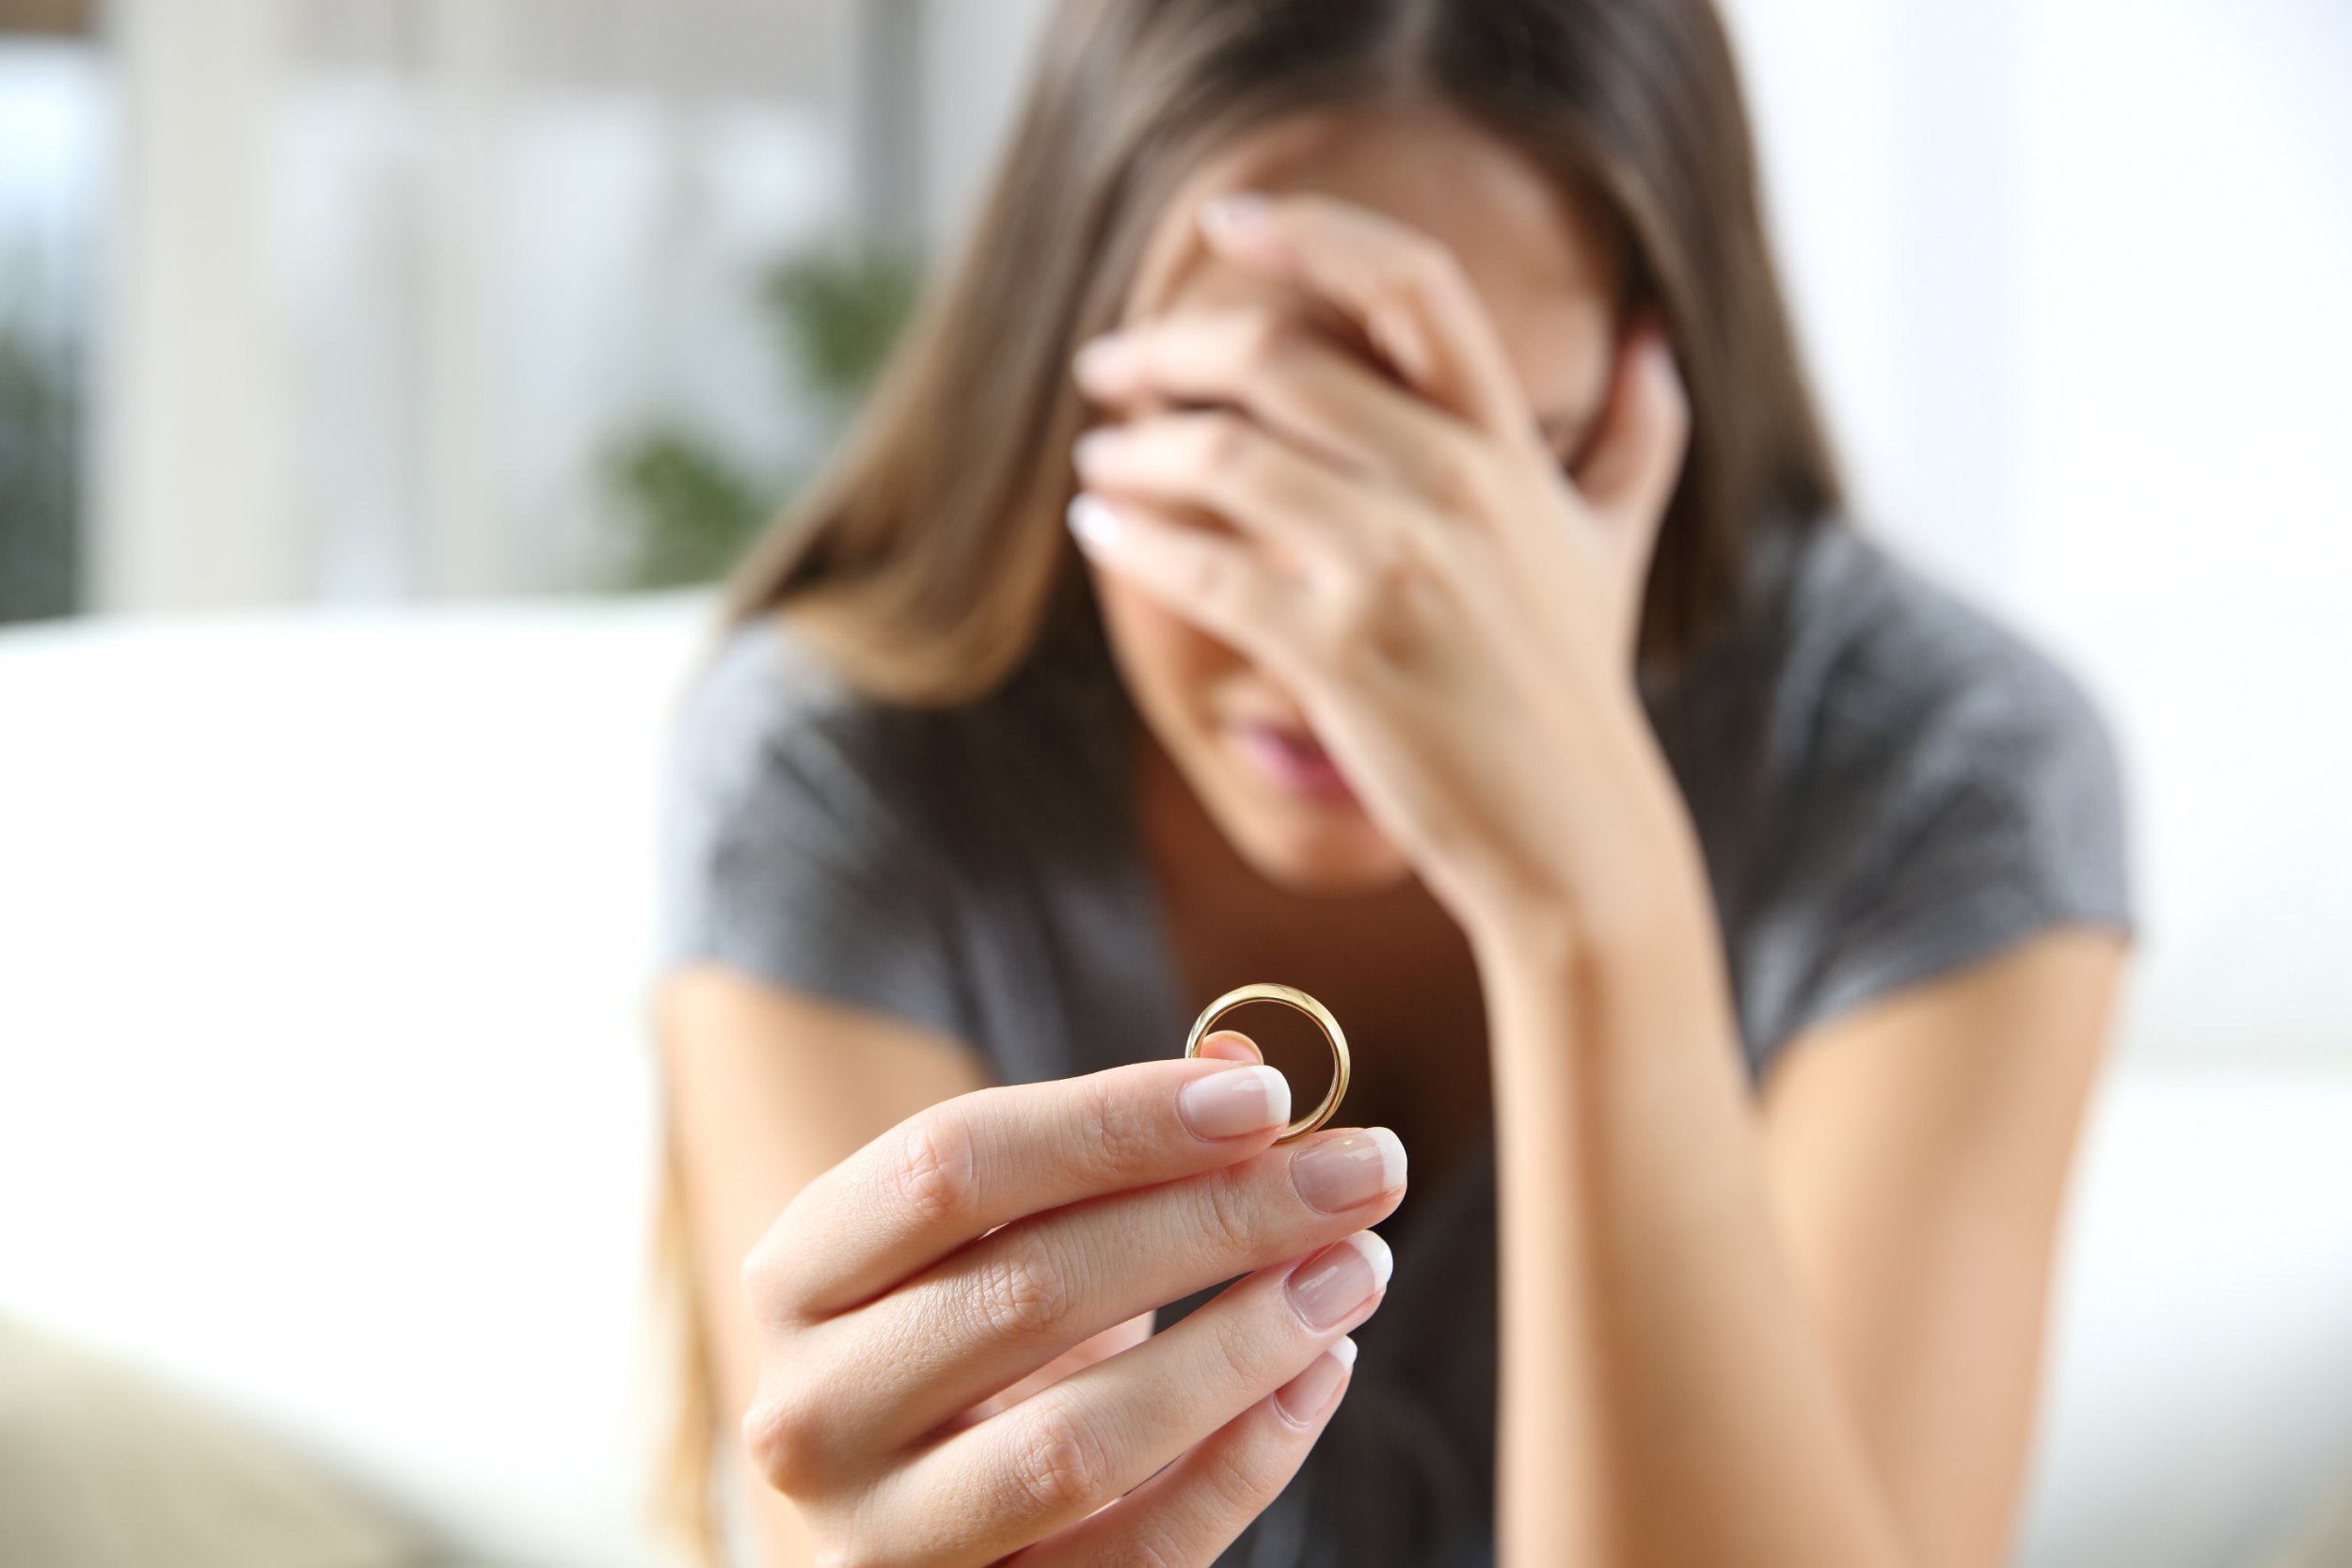 Woman wants to divorce her husband because he